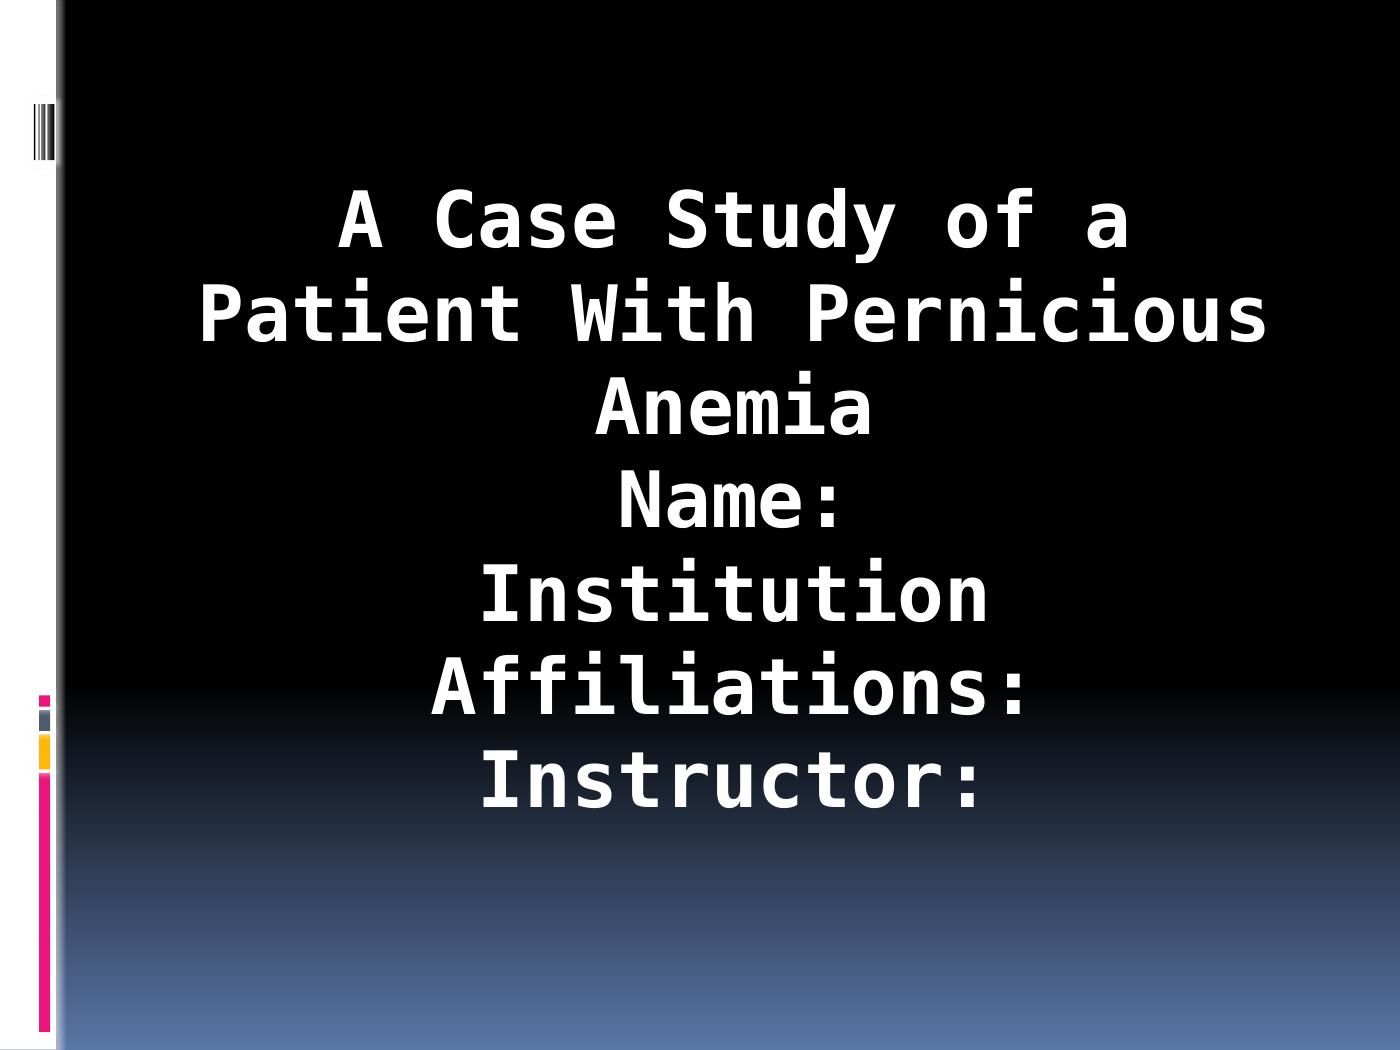 A Case Study of a Patient With Pernicious Anemia_1